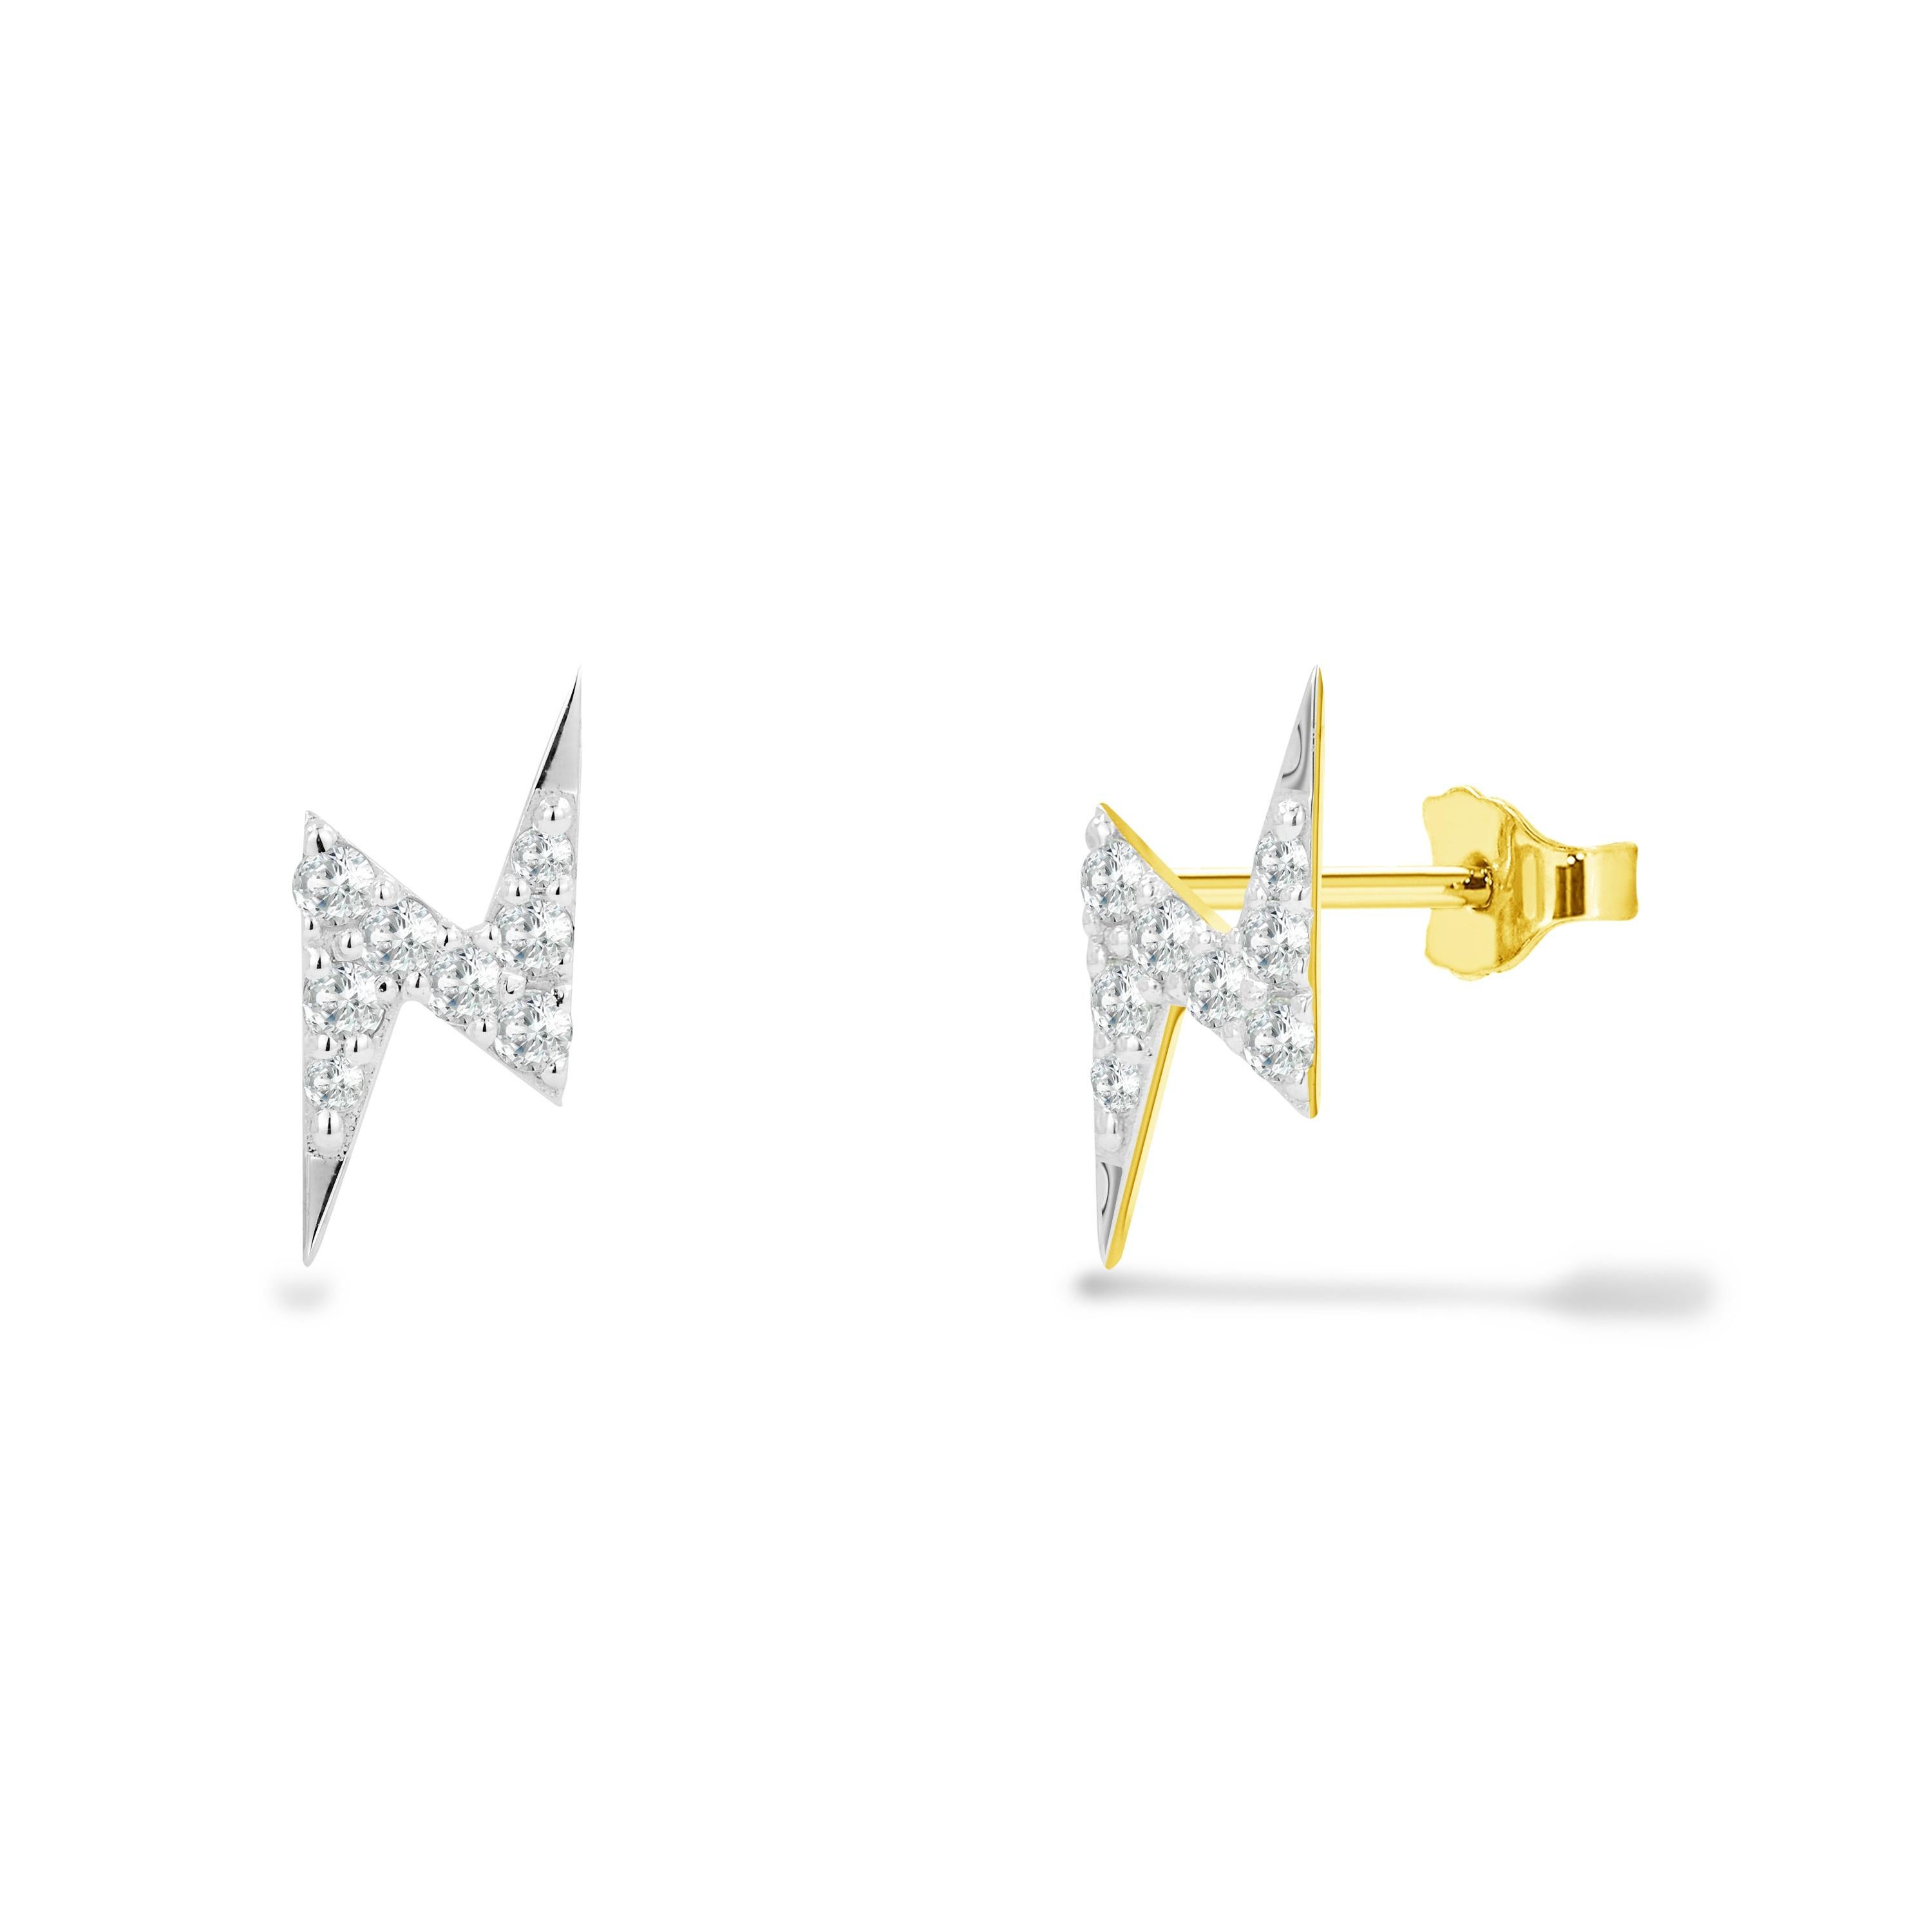 Dainty Diamond Lightning Bolt Stud Earrings in 18k Rose Gold, Yellow Gold, White Gold.

These Dainty Stud Earrings are made of 18k solid gold featuring shiny brilliant round cut natural diamonds set by master setter in our studio. Simple but unique,